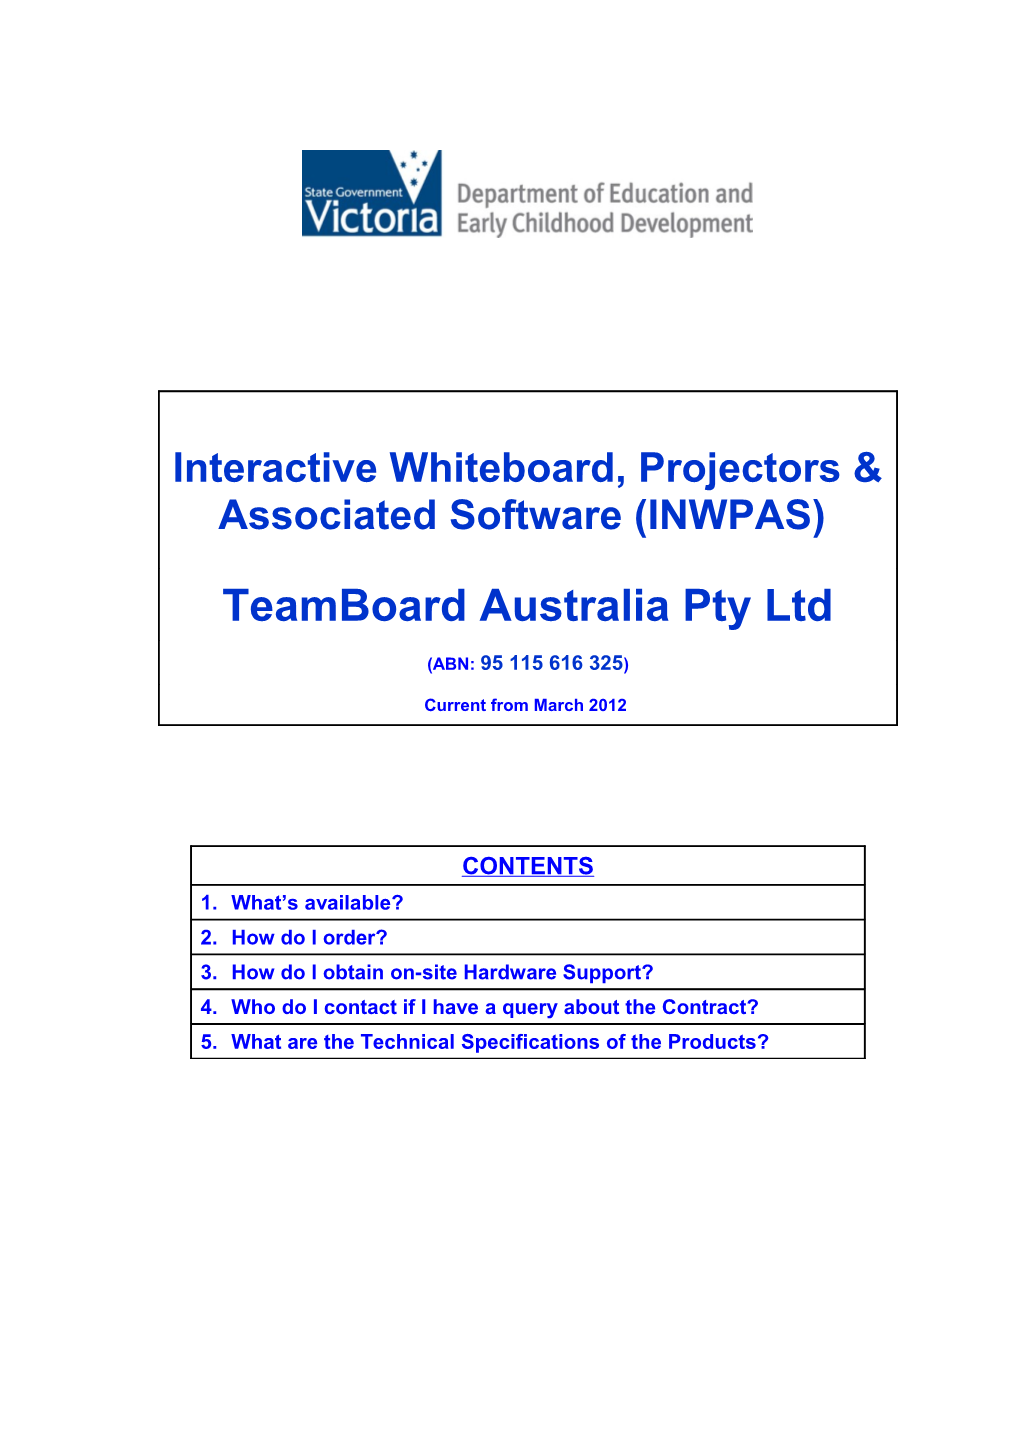 Pricing Schedule for Interactive Whiteboard, Projectors and Associated Software (INWPAS)